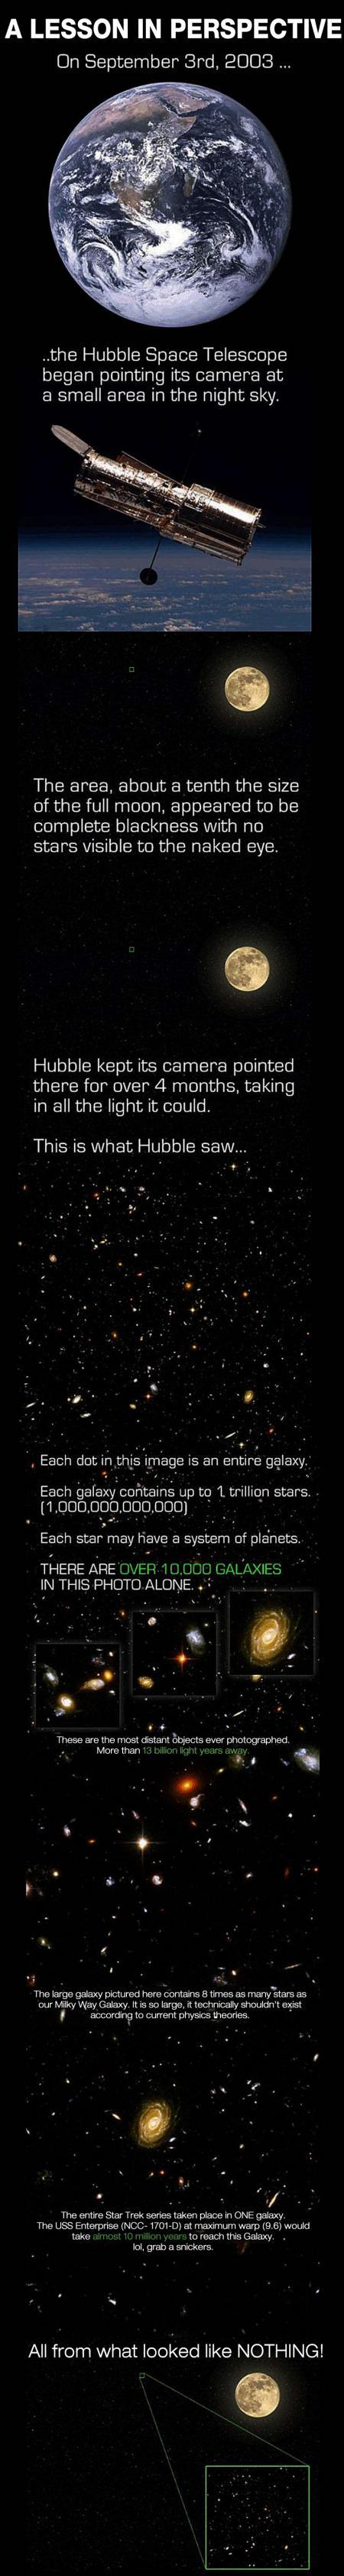 a lesson in perspective, the hubble space telescope finds thousands of galaxies by photographing a tiny slice of the sky for 4 months